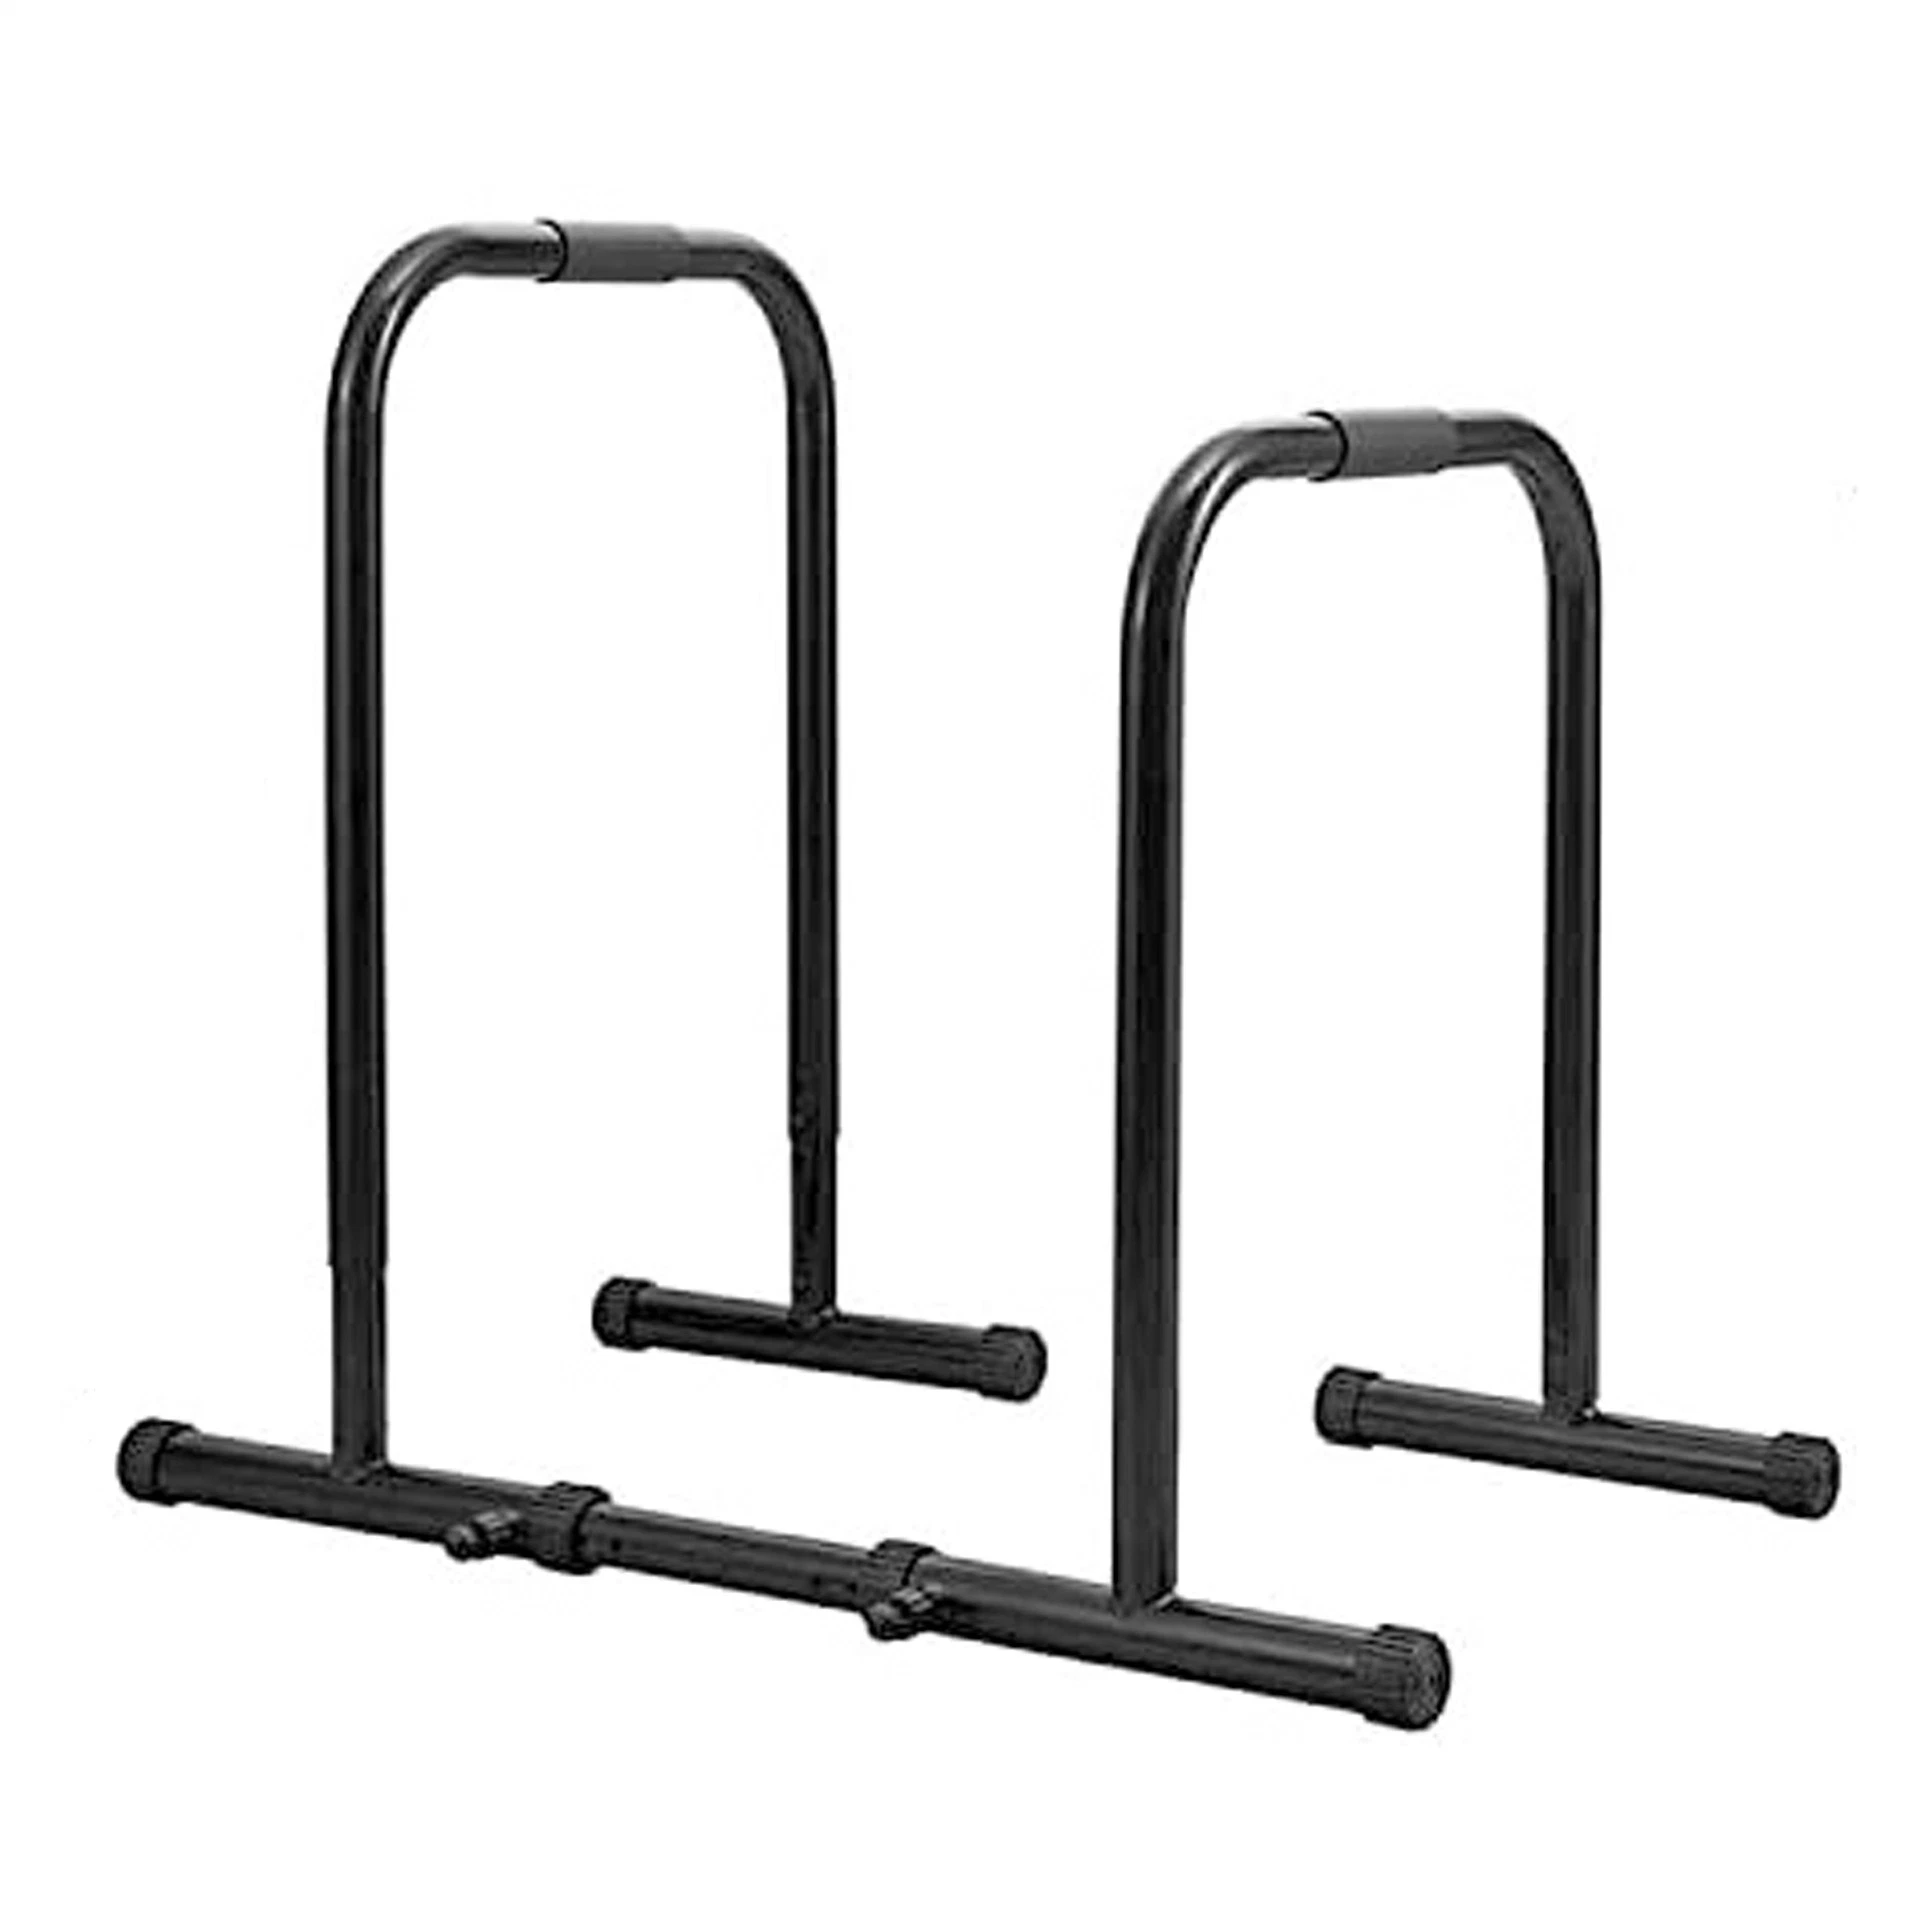 High Quality Fitness Exercise Tool Push-up Bar with Foam Handle H-Shaped Push-up Grips Push up Stands Bars